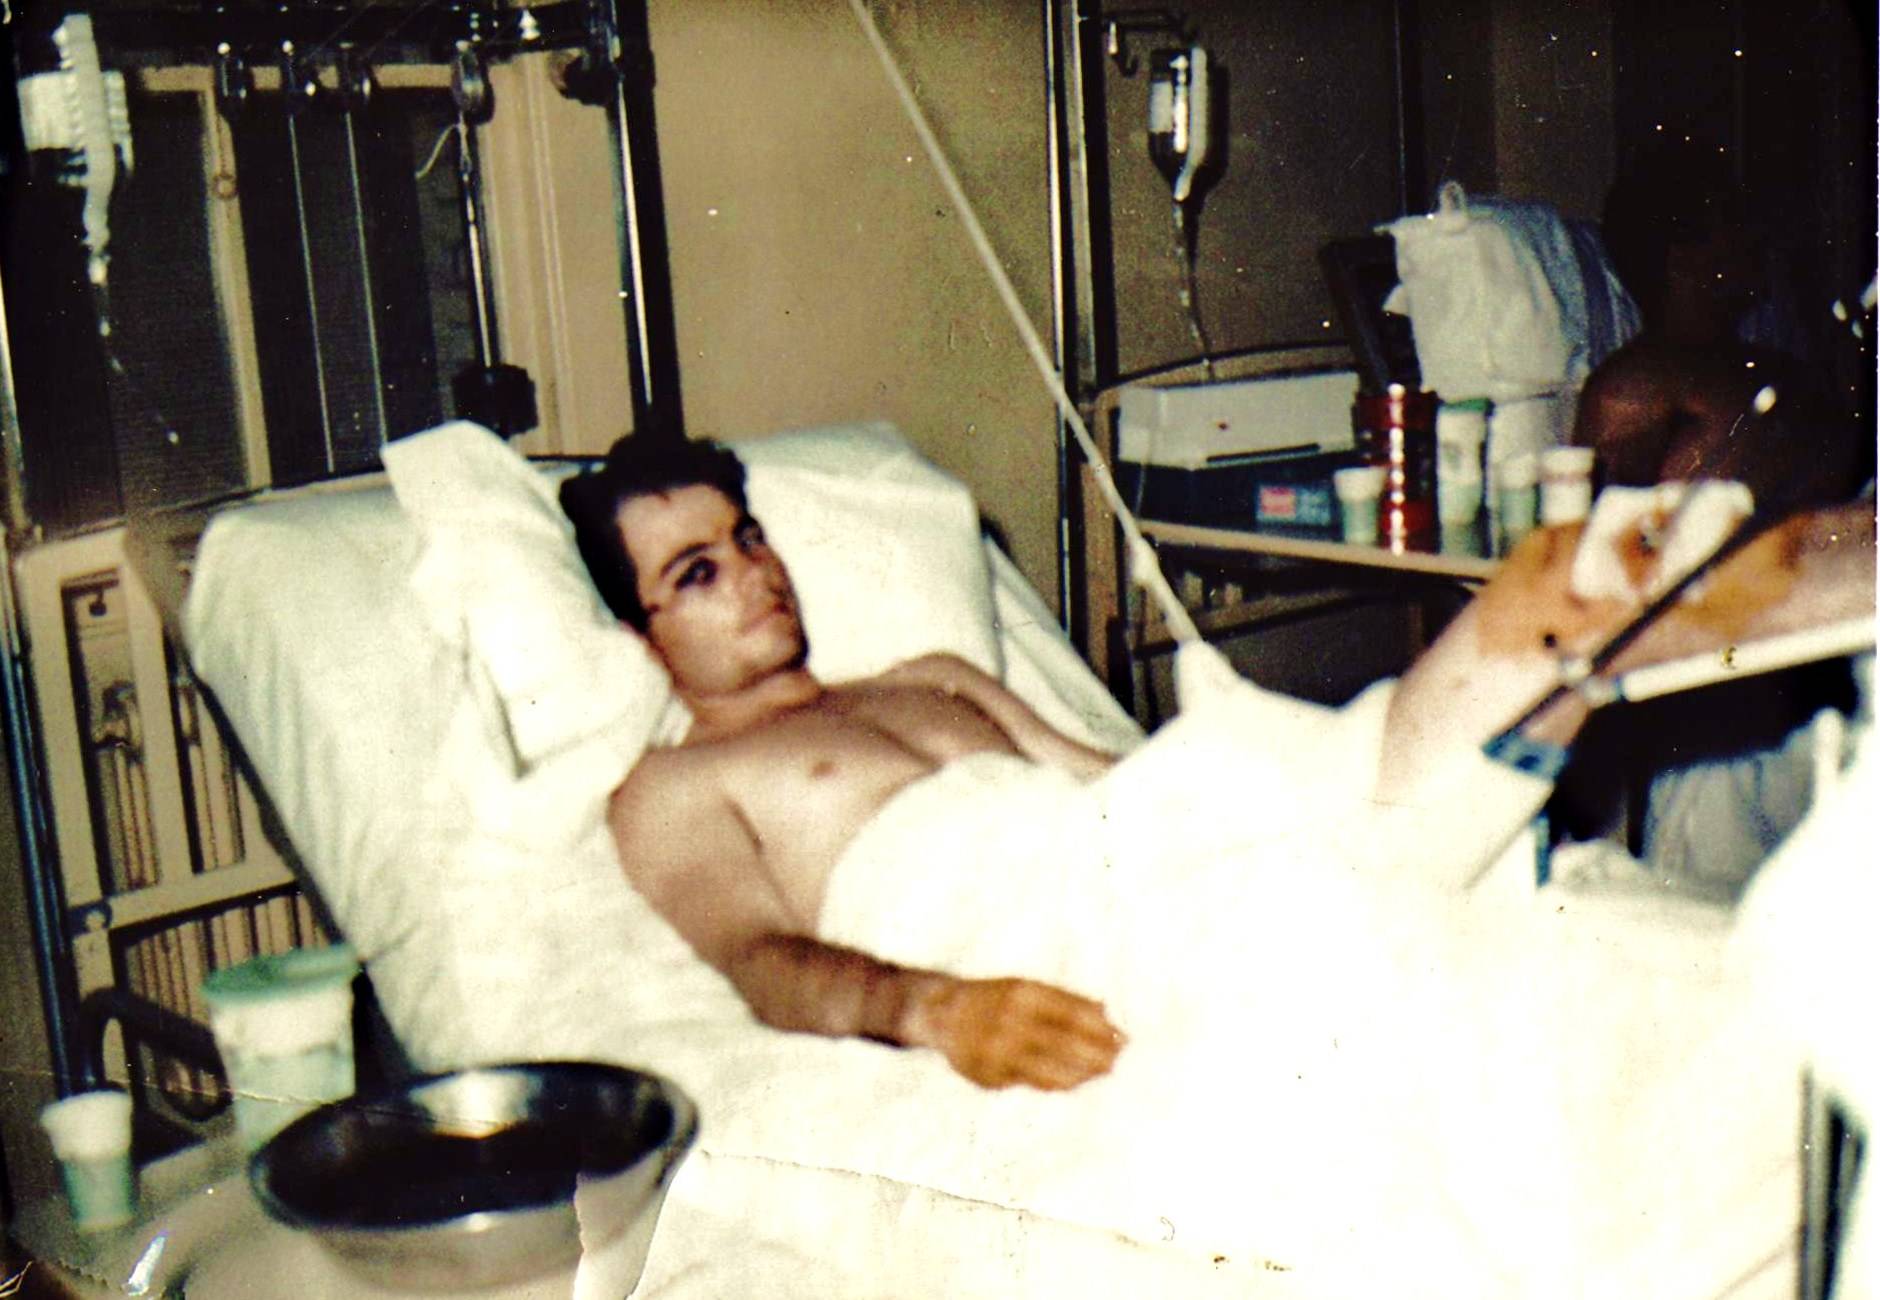 A badly bruised and wounded young man recuperating in a hospital bed.